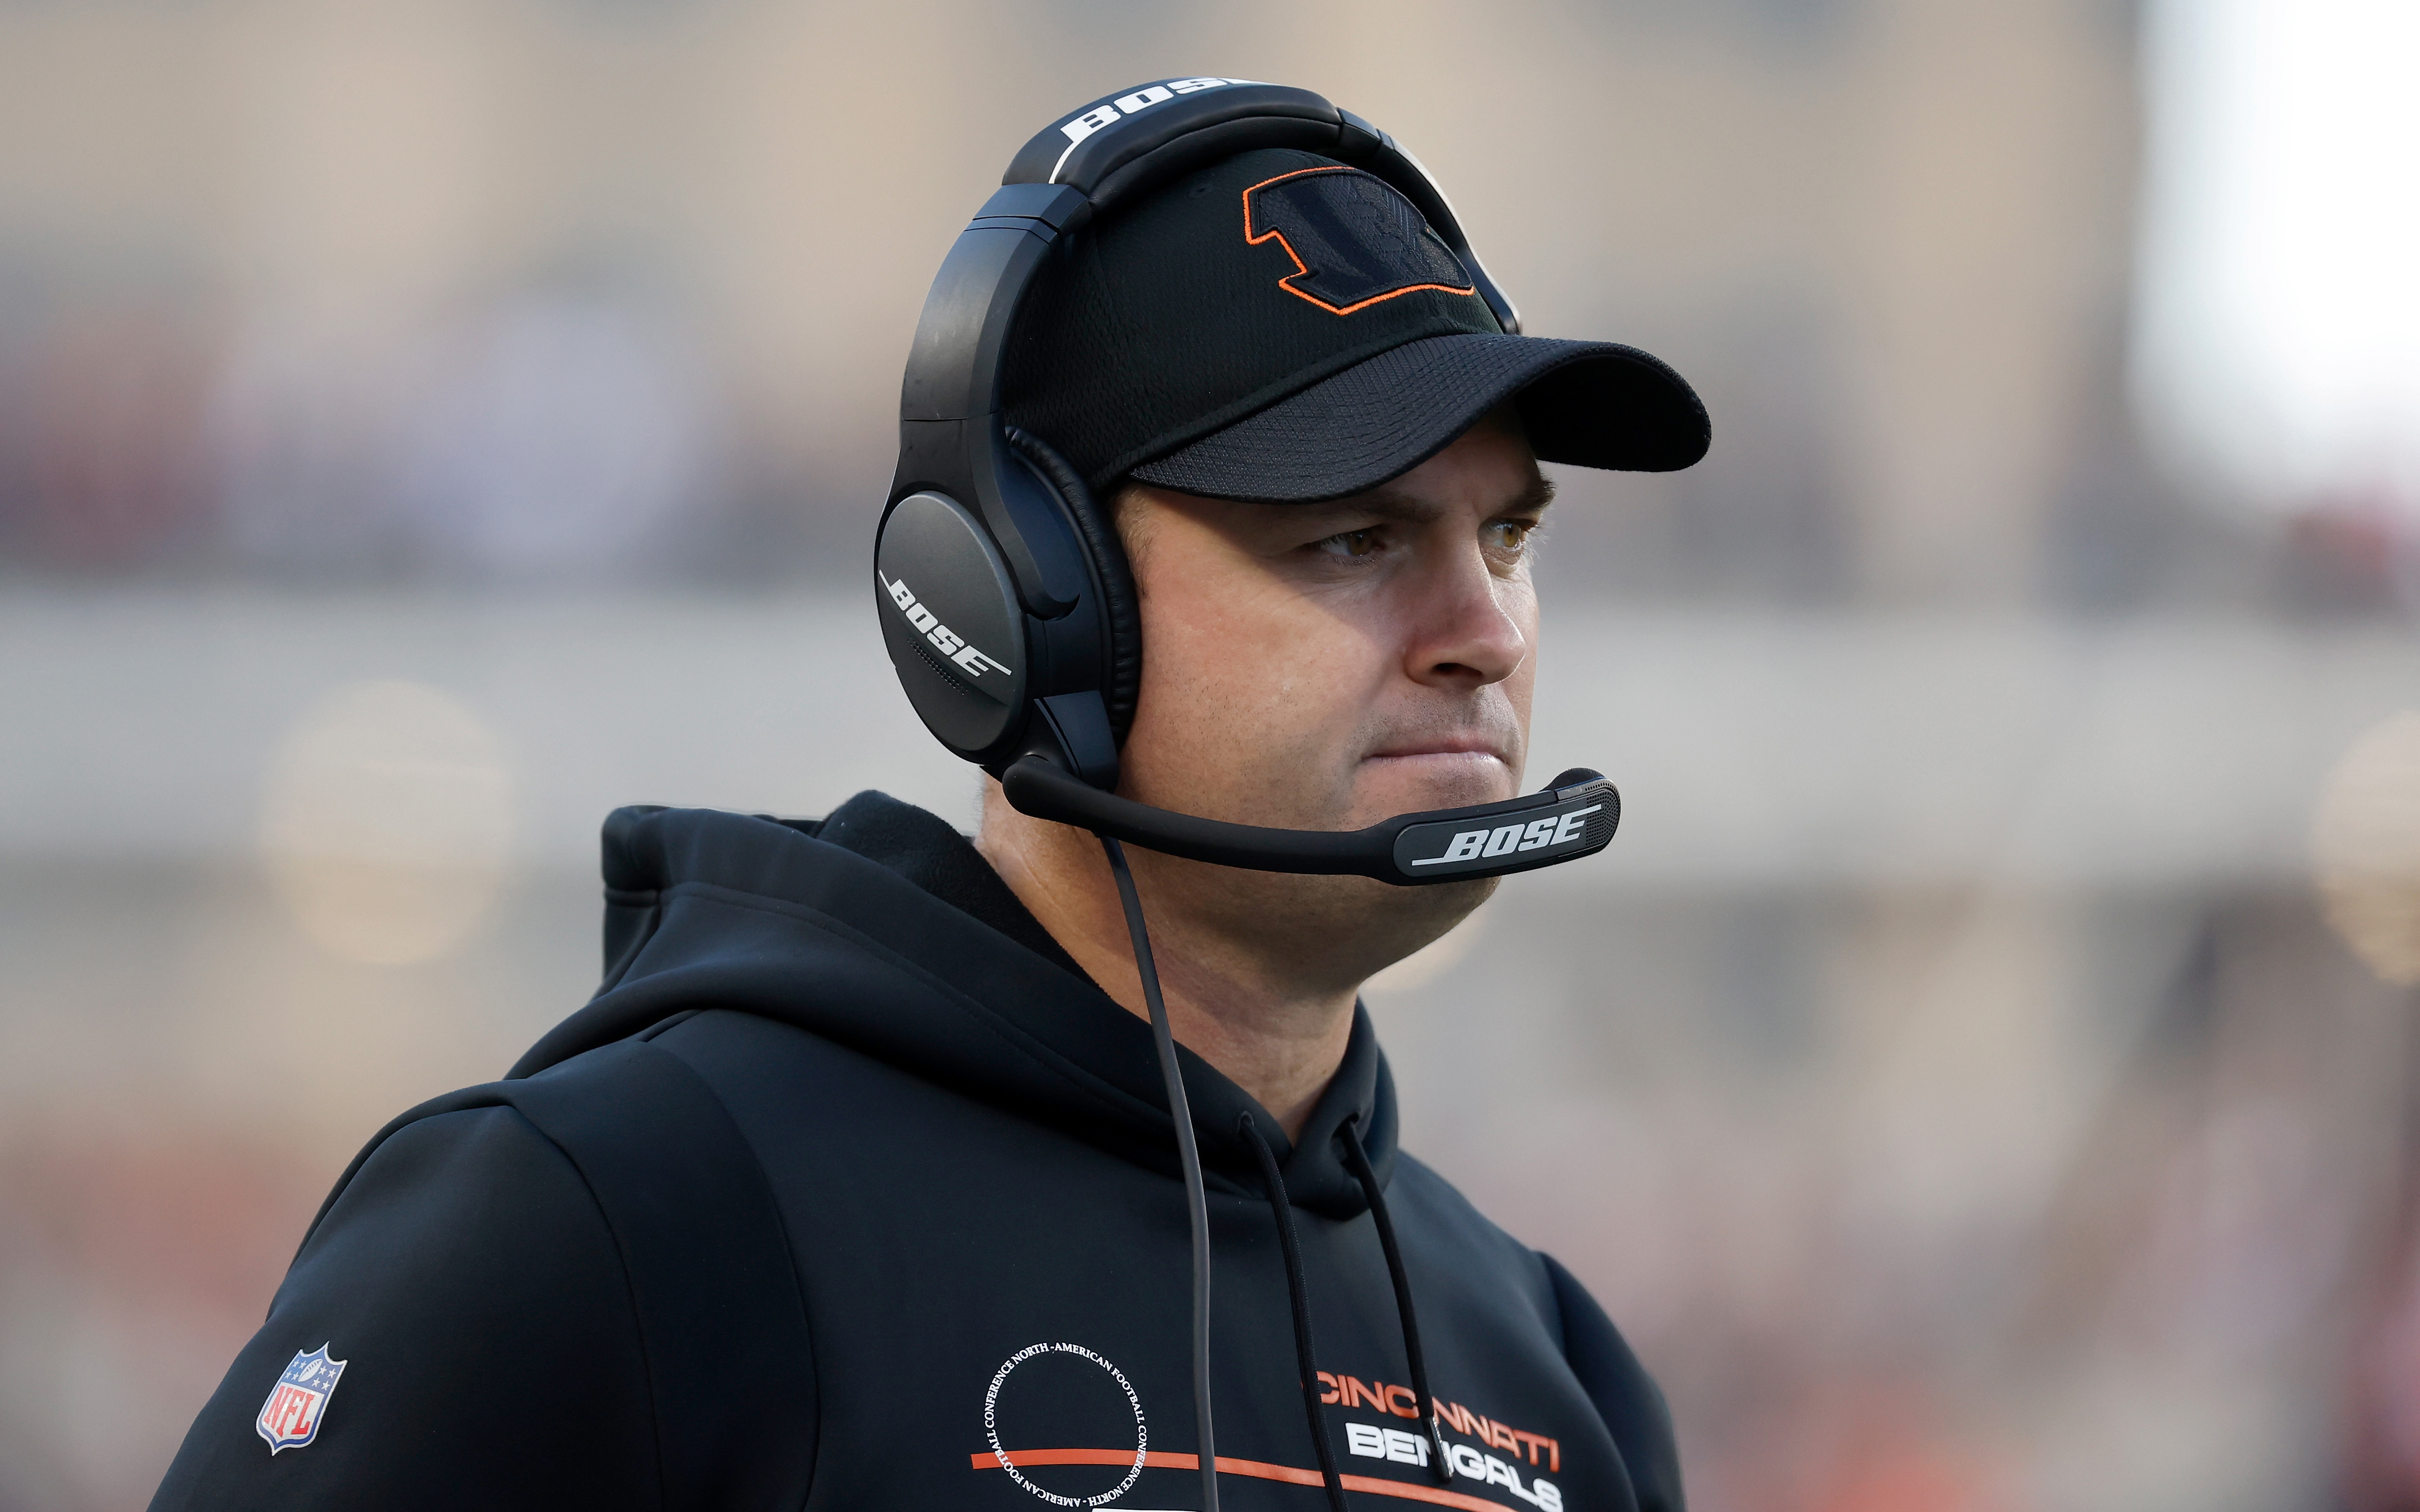 Bengals head coach Zac Taylor got carded at a Cincinnati bar hours after  winning the team's first playoff game in 31 years | This is the Loop |  